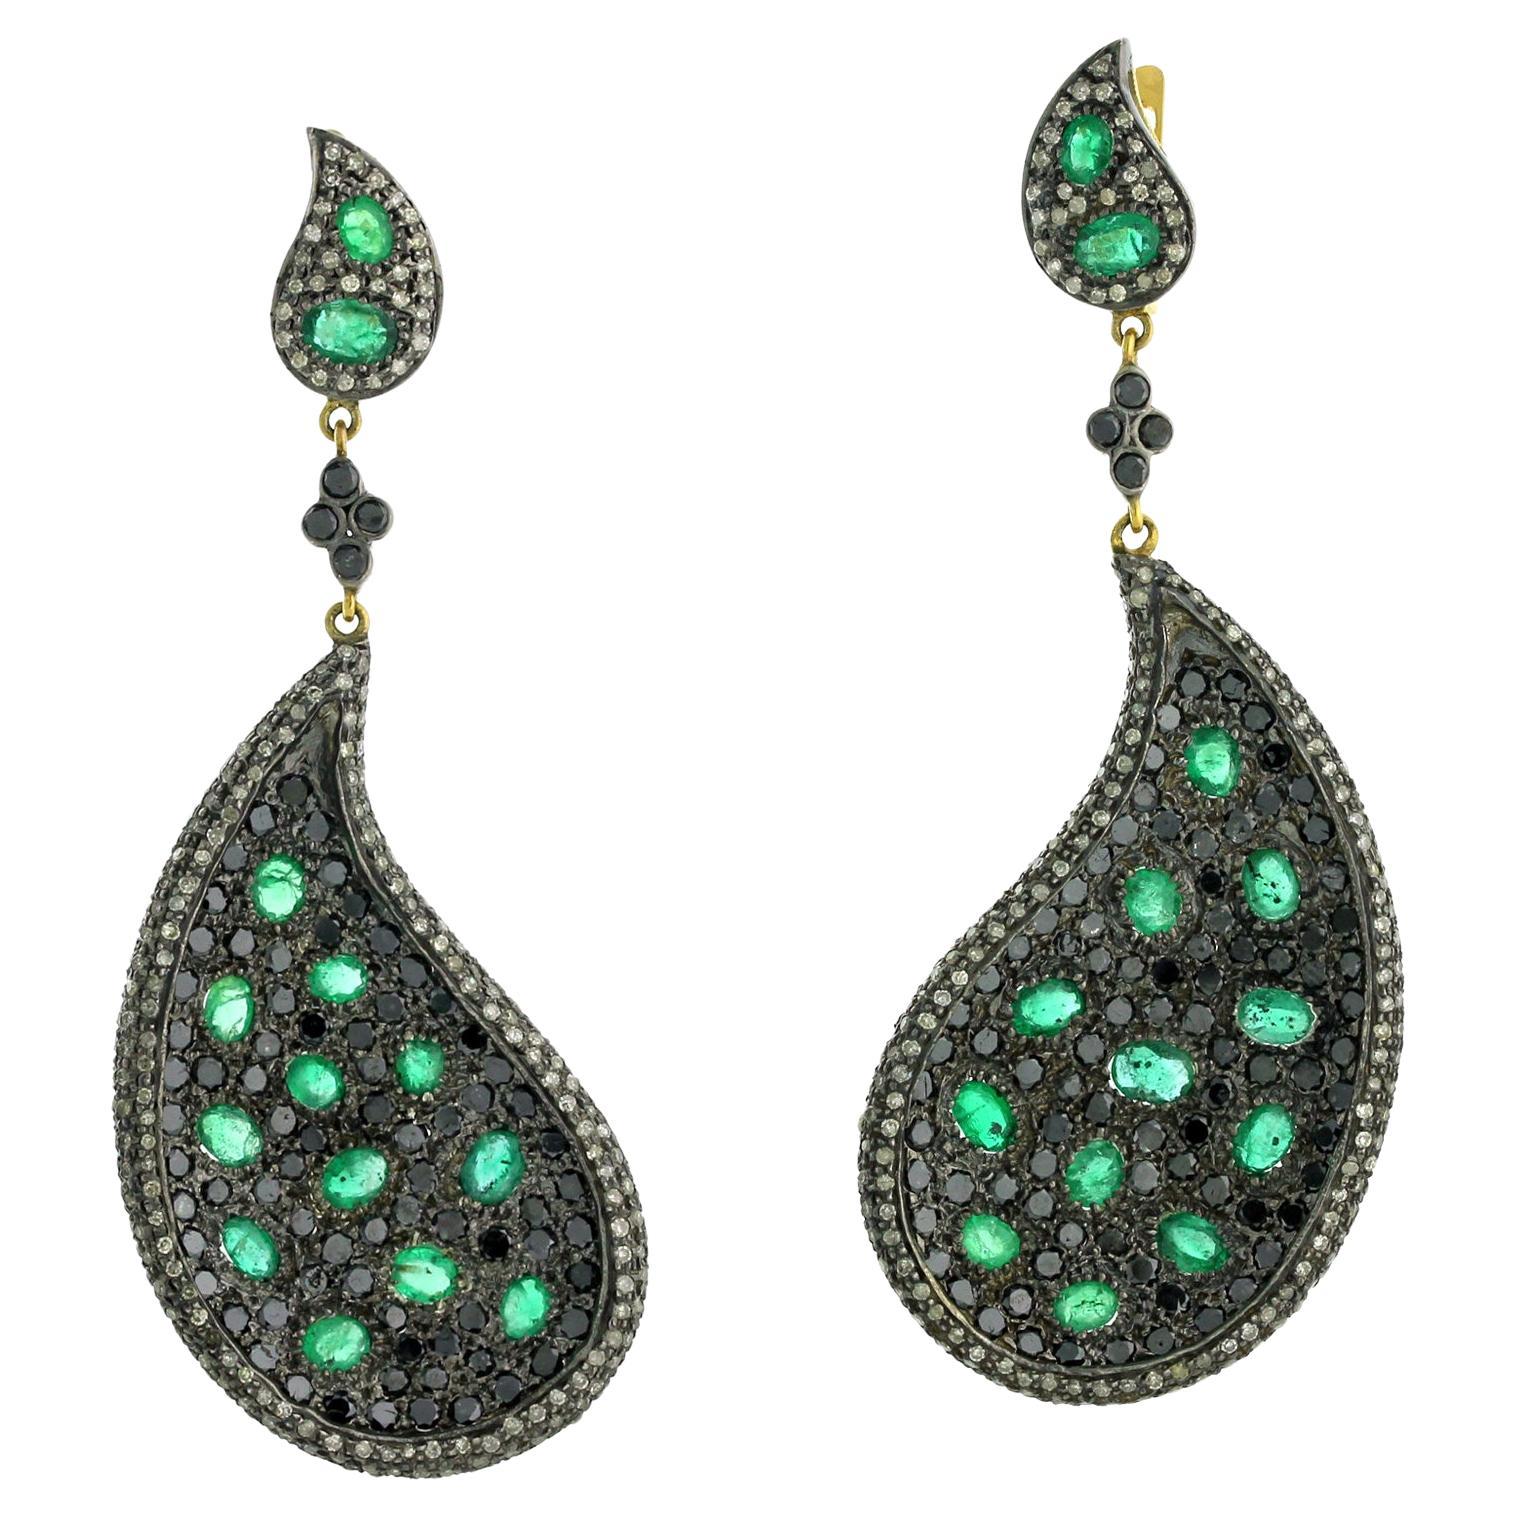 Feather Shaped Earrings With Emerald & Pave Diamonds Made in 14k Gold & Silver For Sale